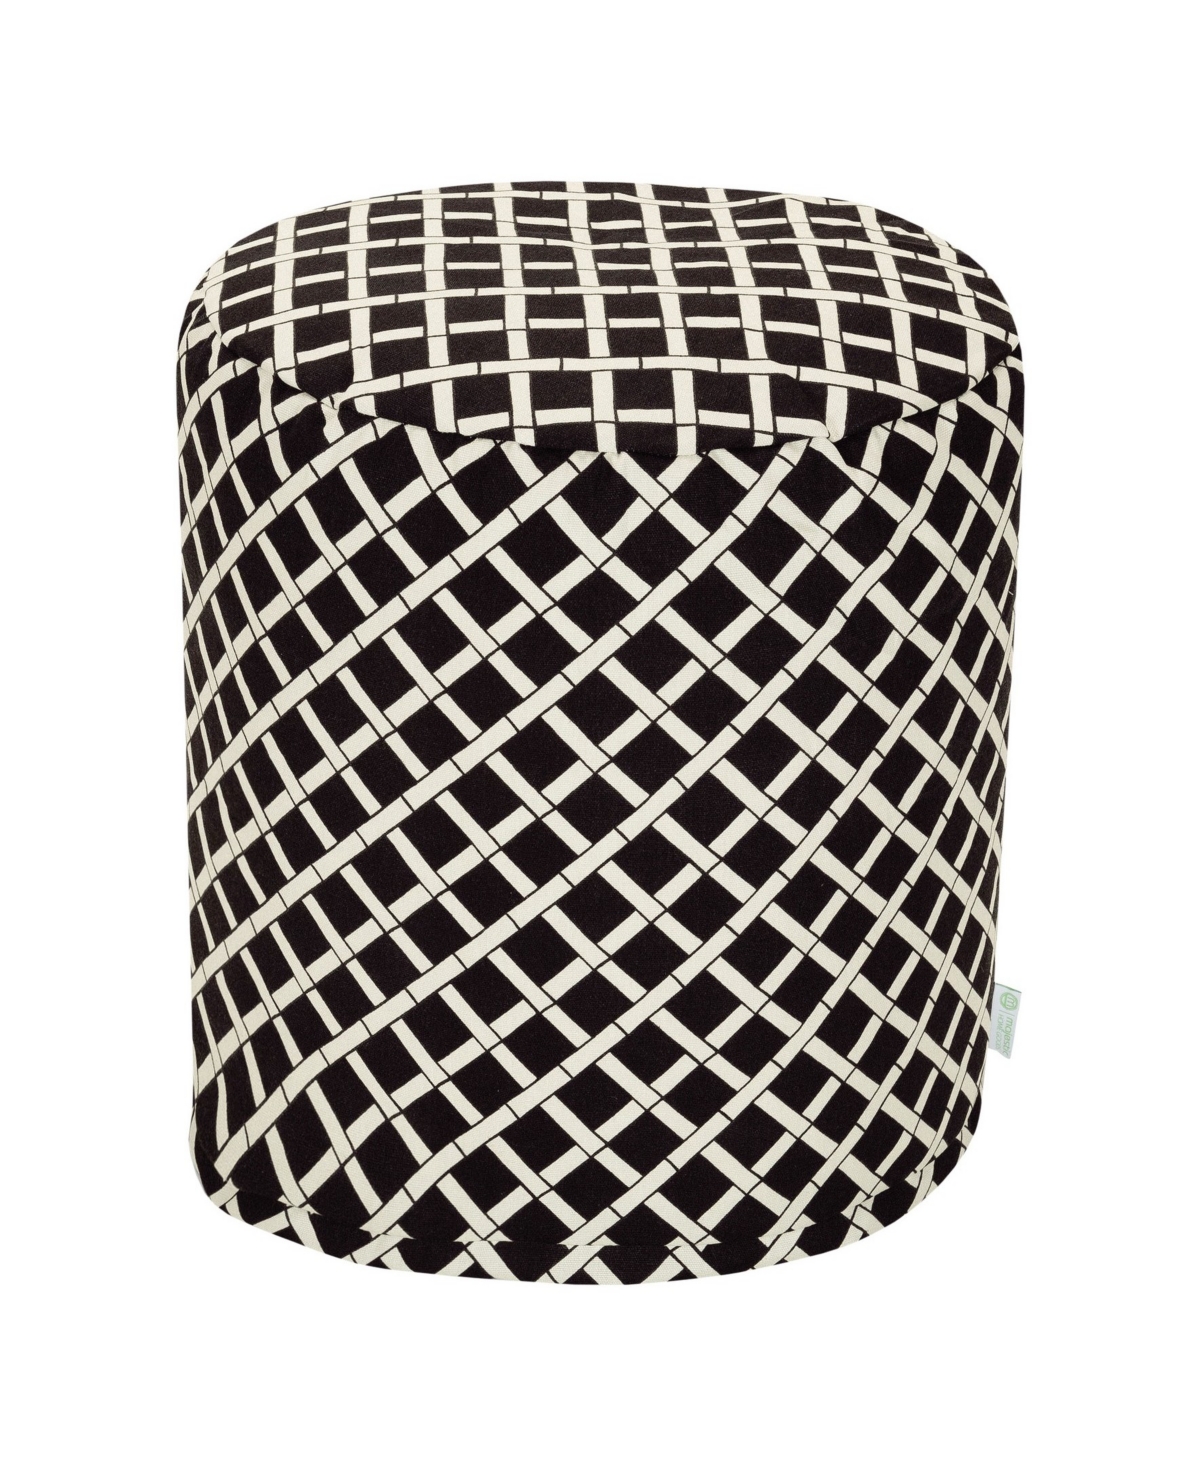 UPC 859072204034 product image for Majestic Home Goods Ottoman Round Pouf 16